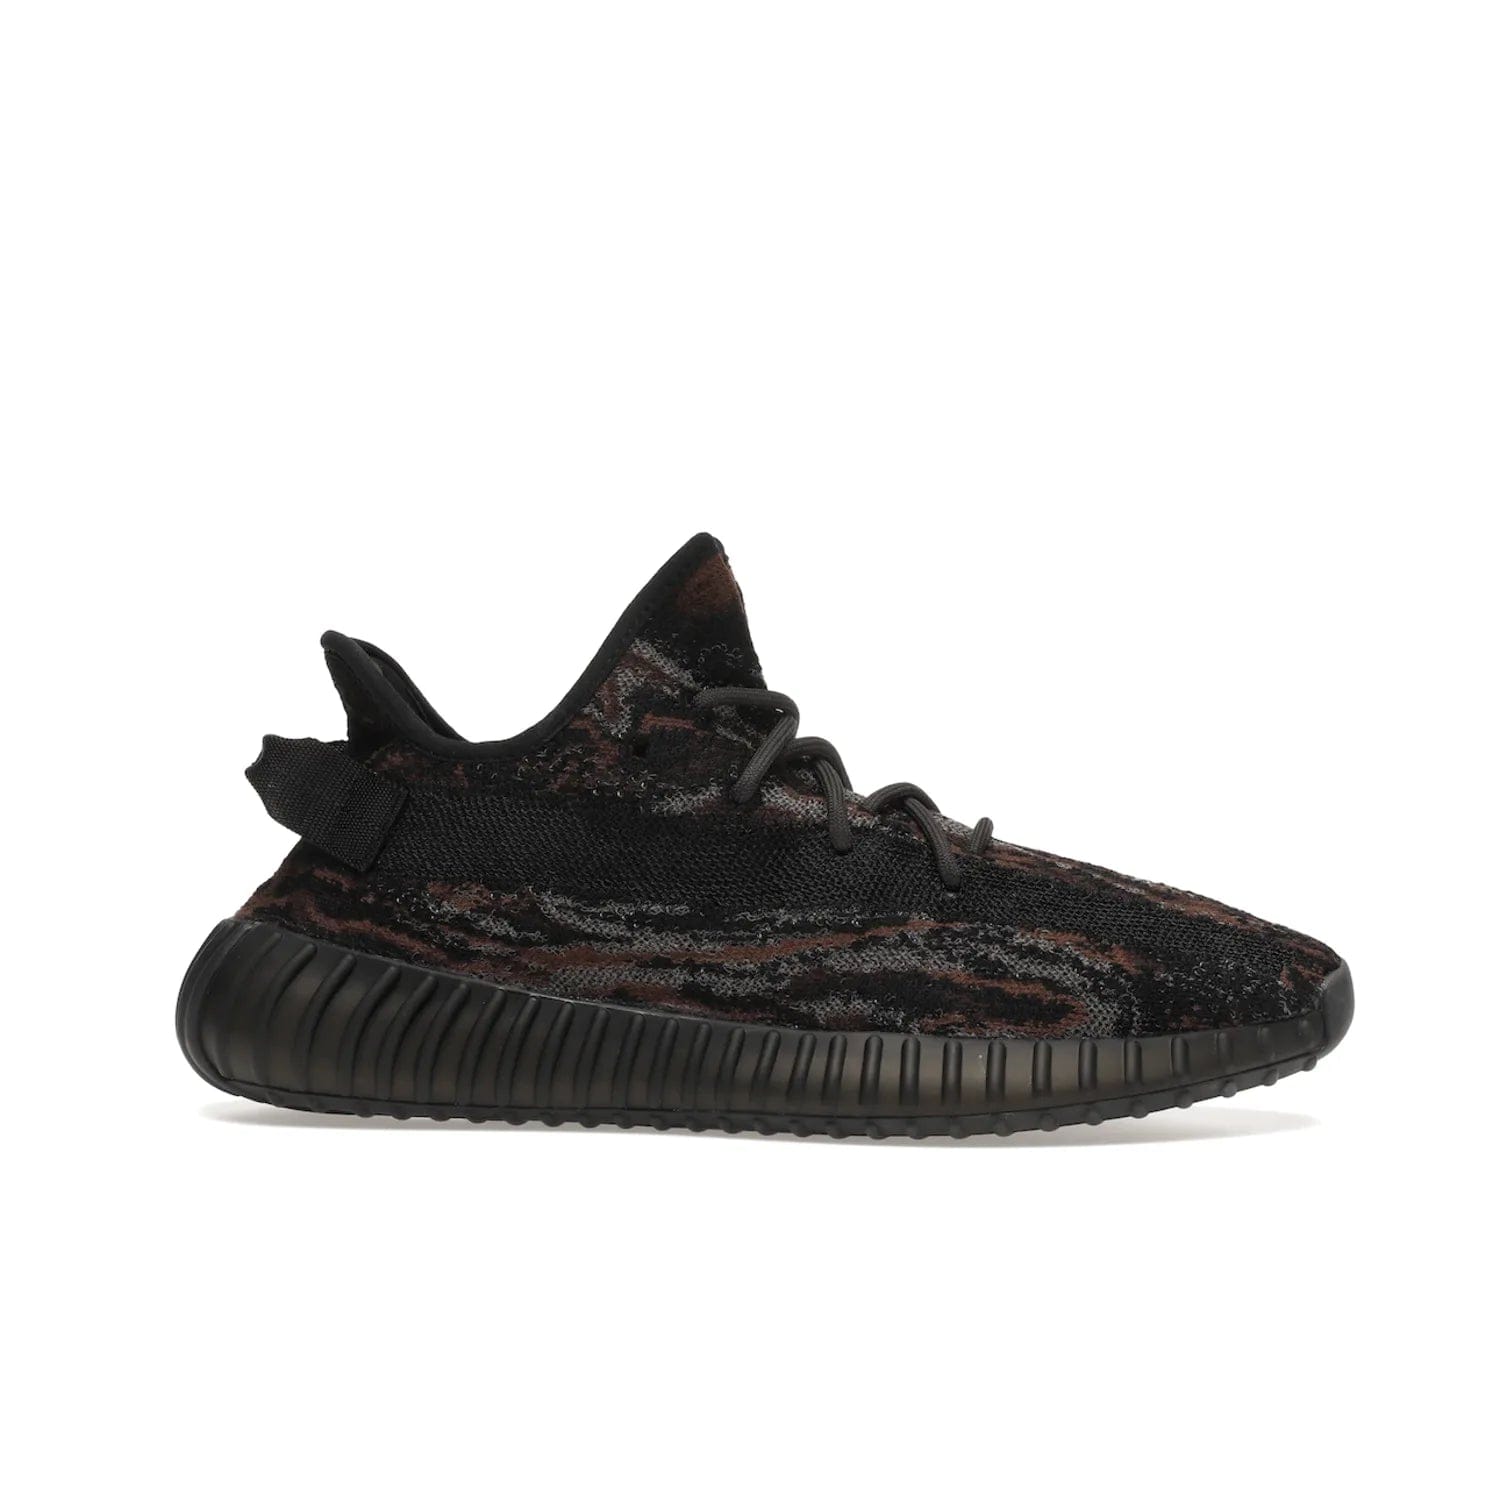 adidas Yeezy Boost 350 V2 MX Rock - Image 2 - Only at www.BallersClubKickz.com - The adidas Yeezy Boost 350 V2 MX Rock features a stylish marbled upper of black, grey, and brown tones. Shop the signature Boost sole, heel tab, and mesh side stripe now, available December of 2021.